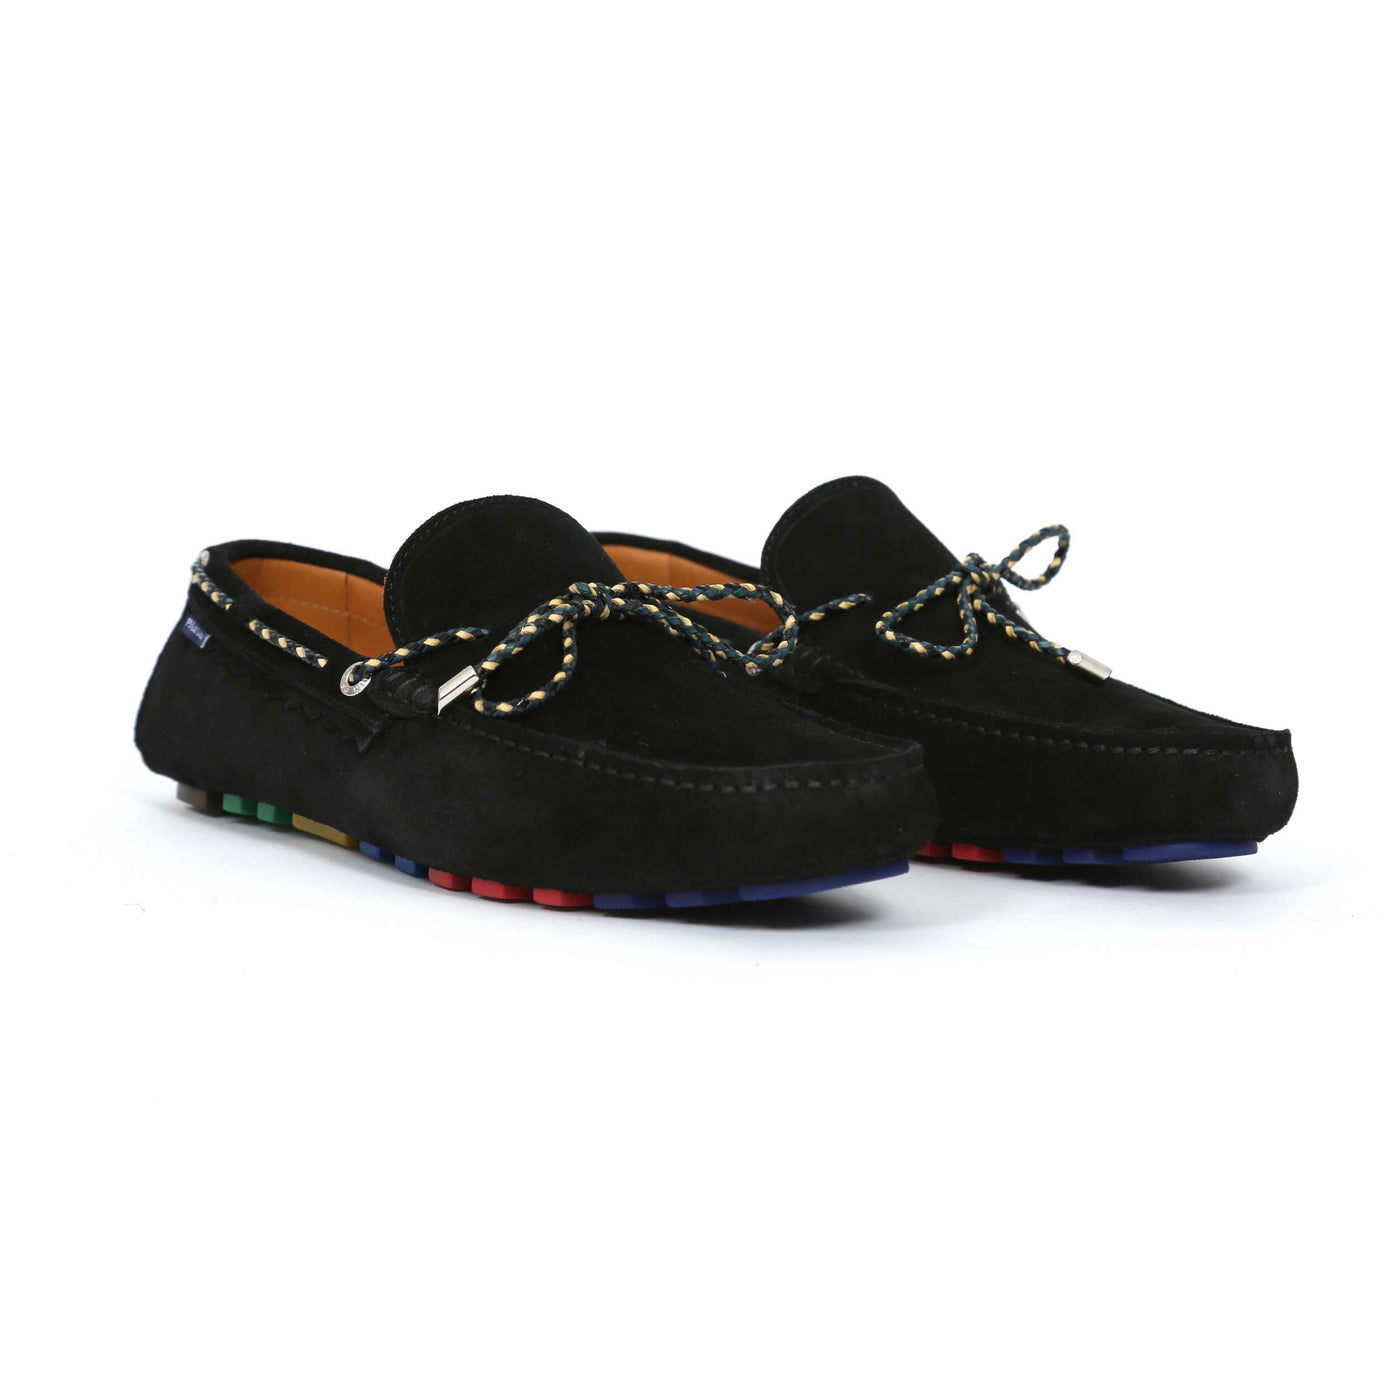 Paul Smith Springfield Loafer in Black Suede Pair